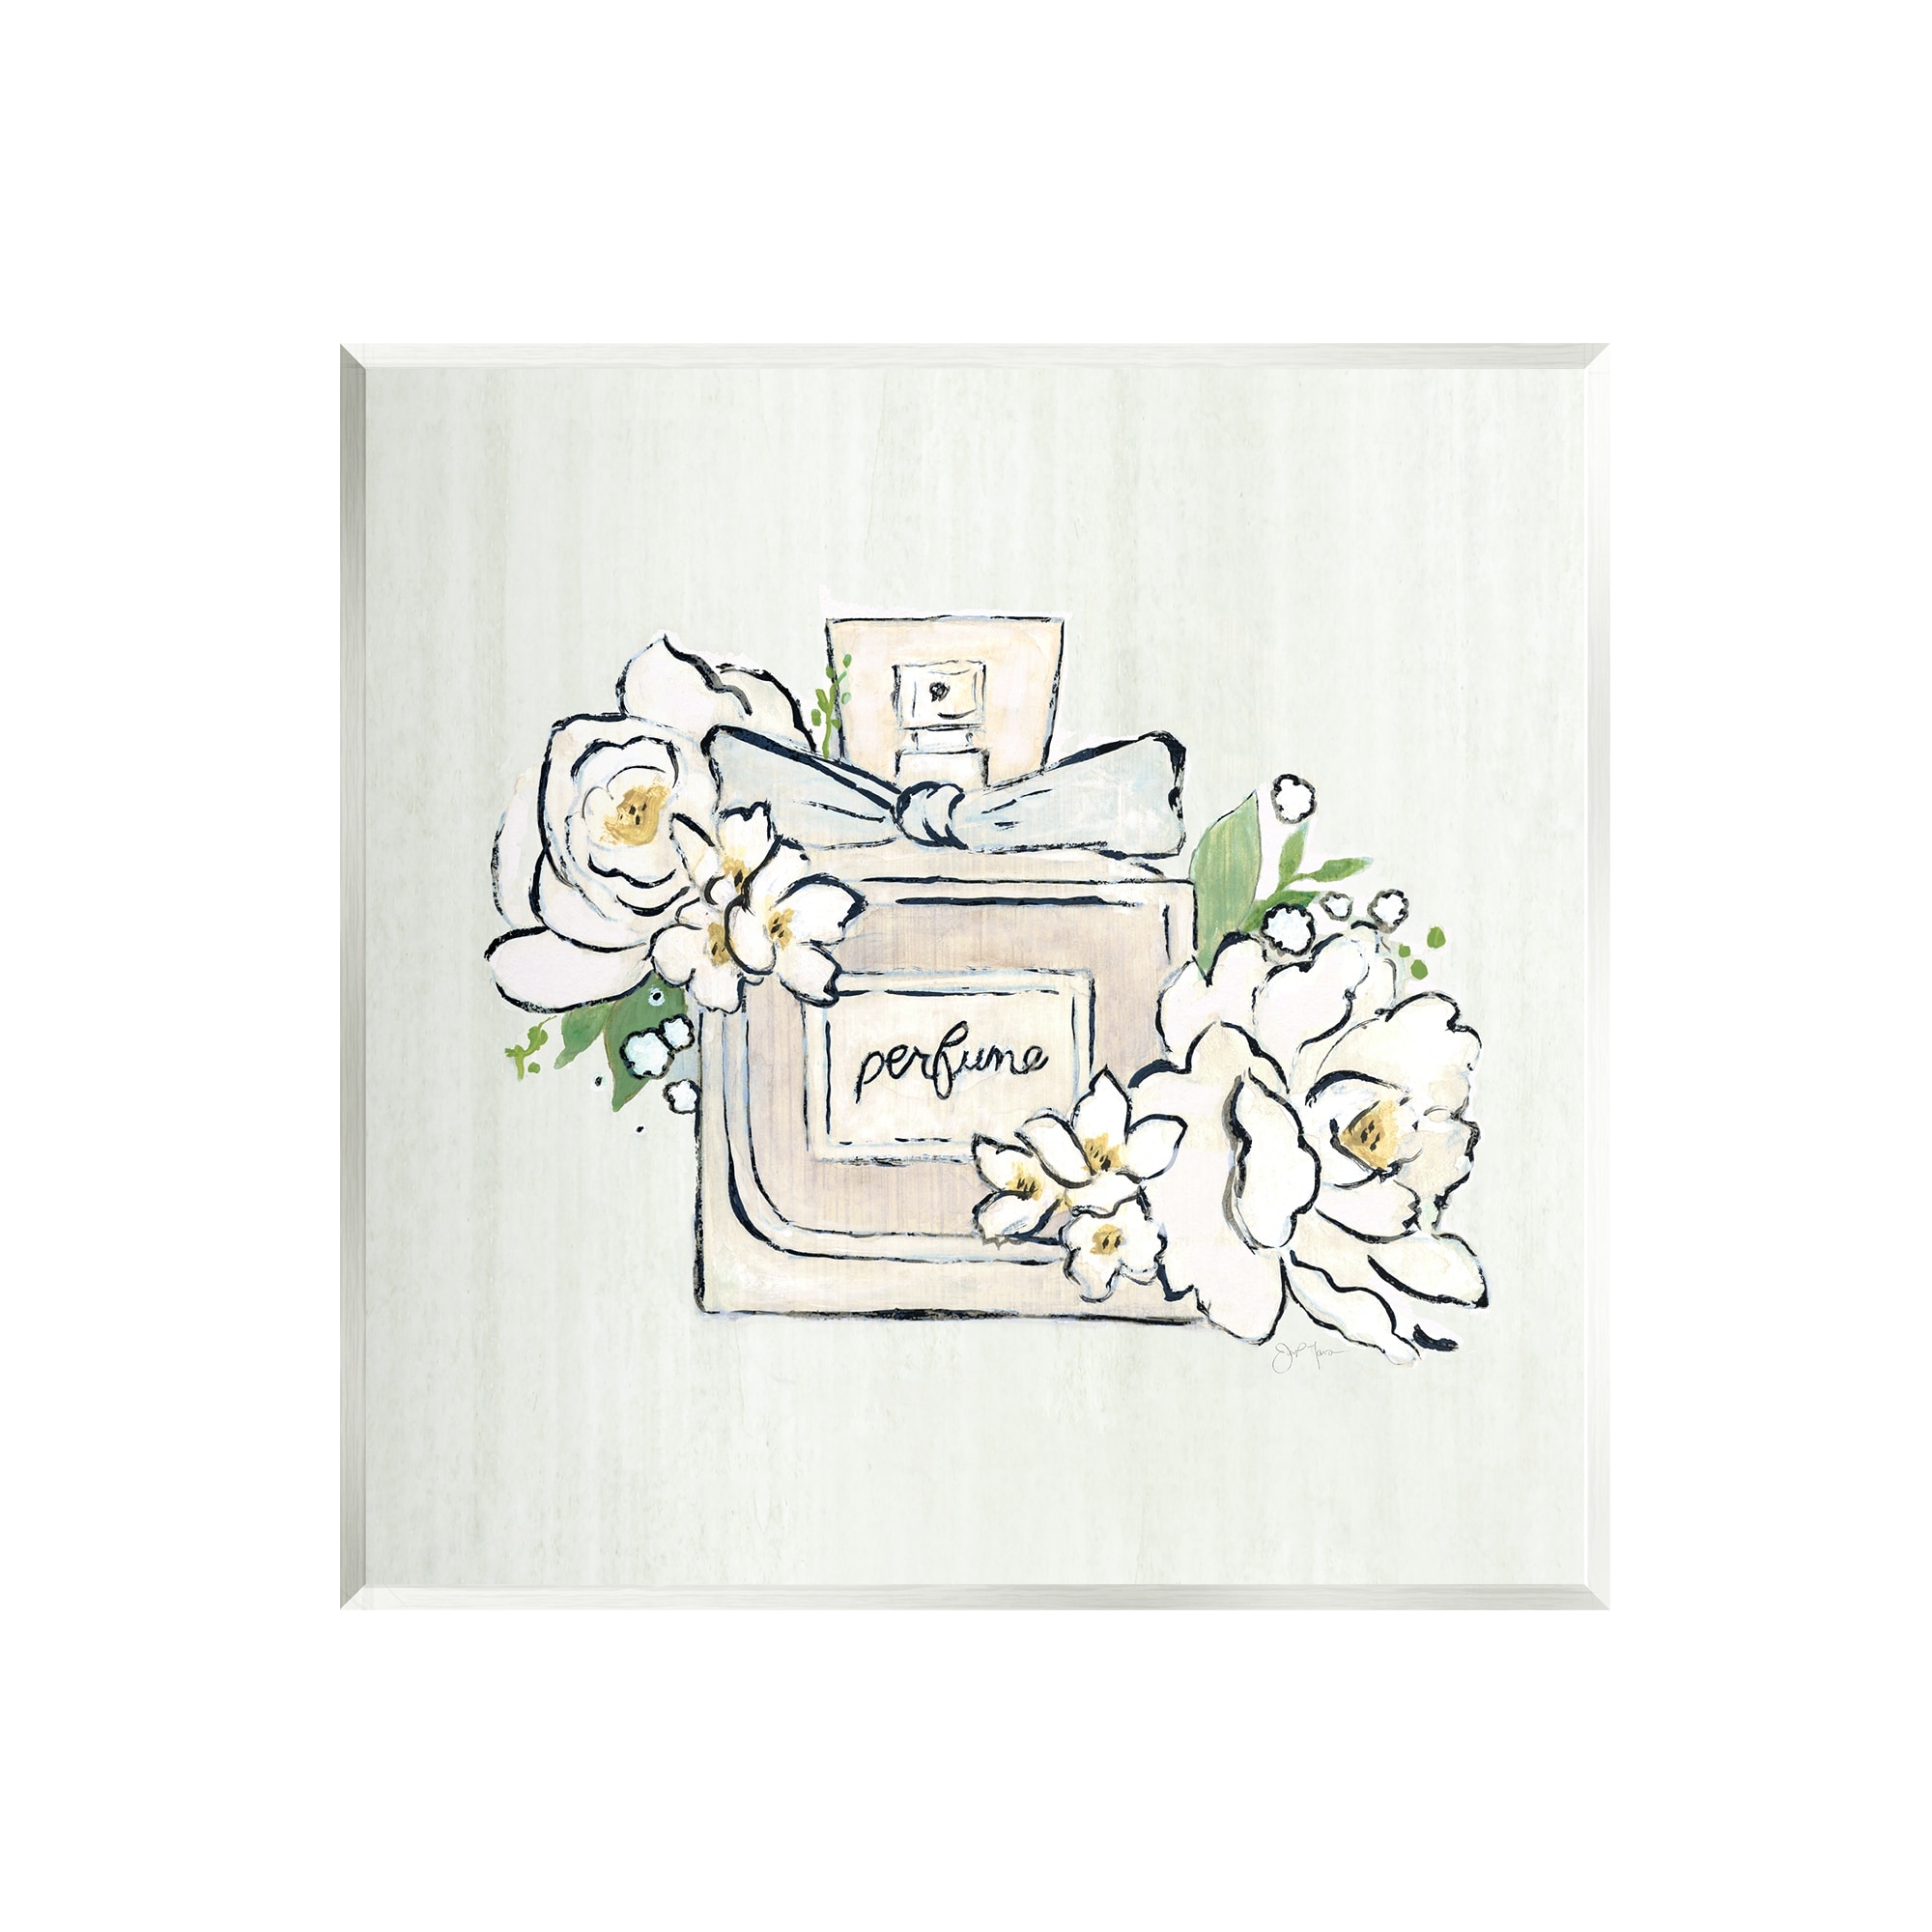 Stupell Industries Blooming White Floral Display on Glam Designer Bookstack  Wall Art, 11 x 14, Black Framed